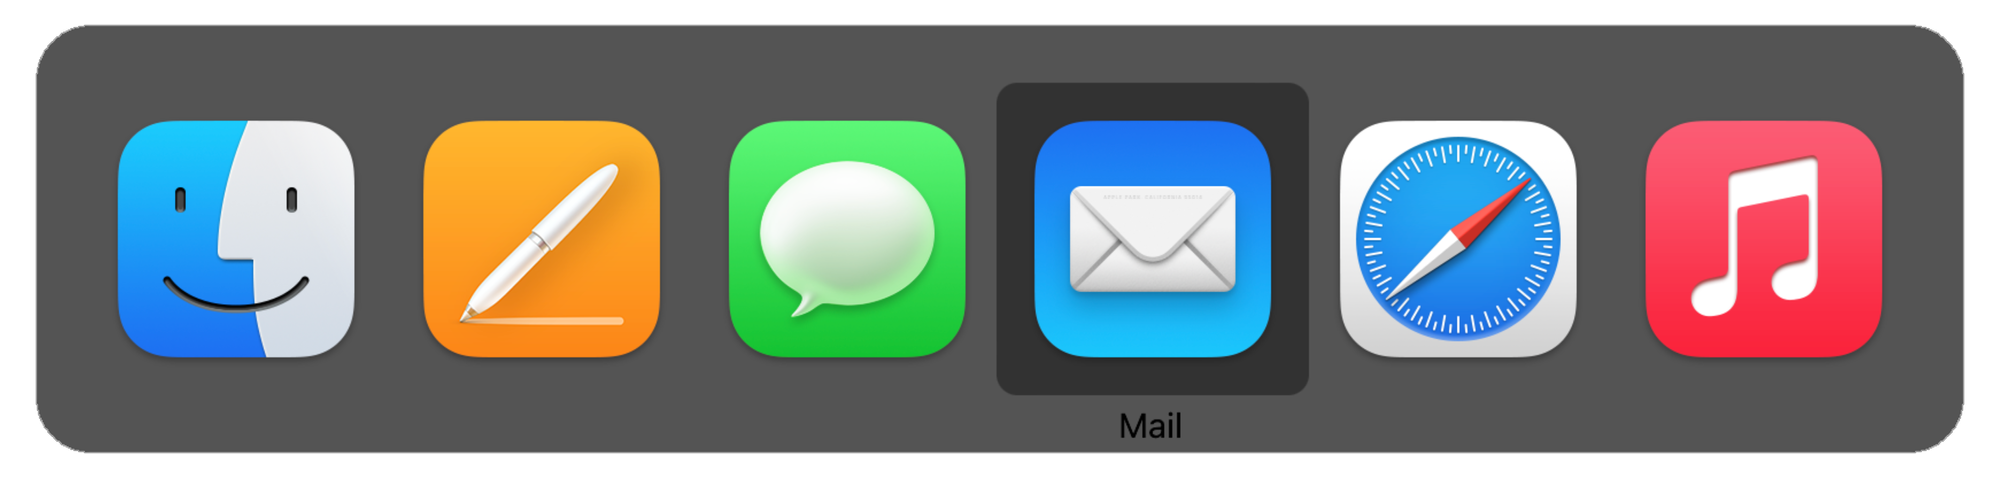 The application switcher menu showing the Mail application selected.